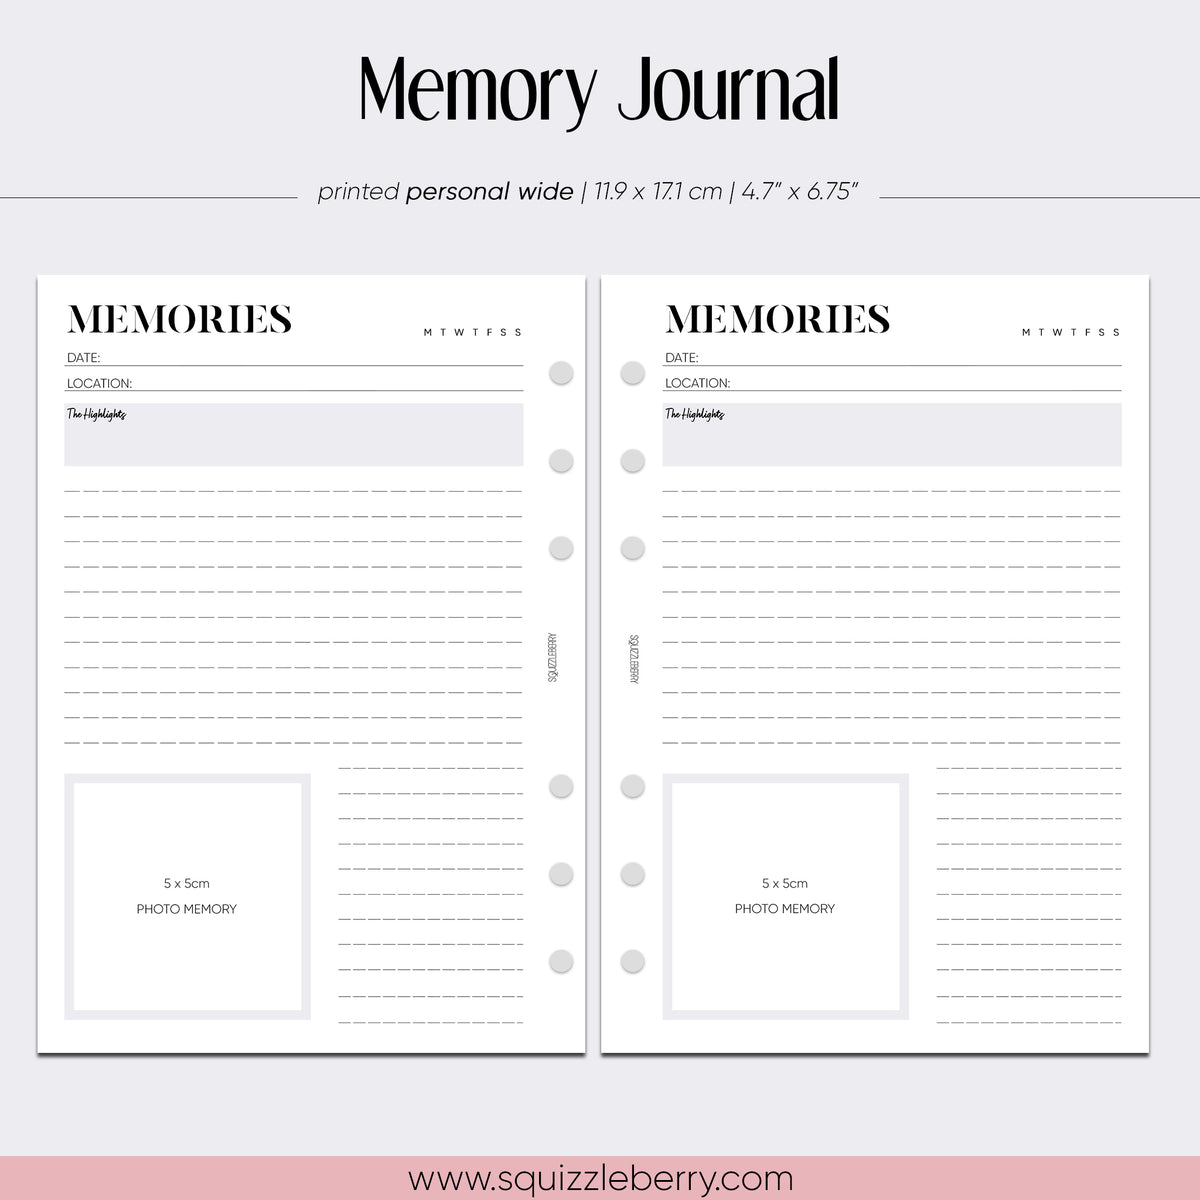 Memory Journal - Personal Wide | SquizzleBerry